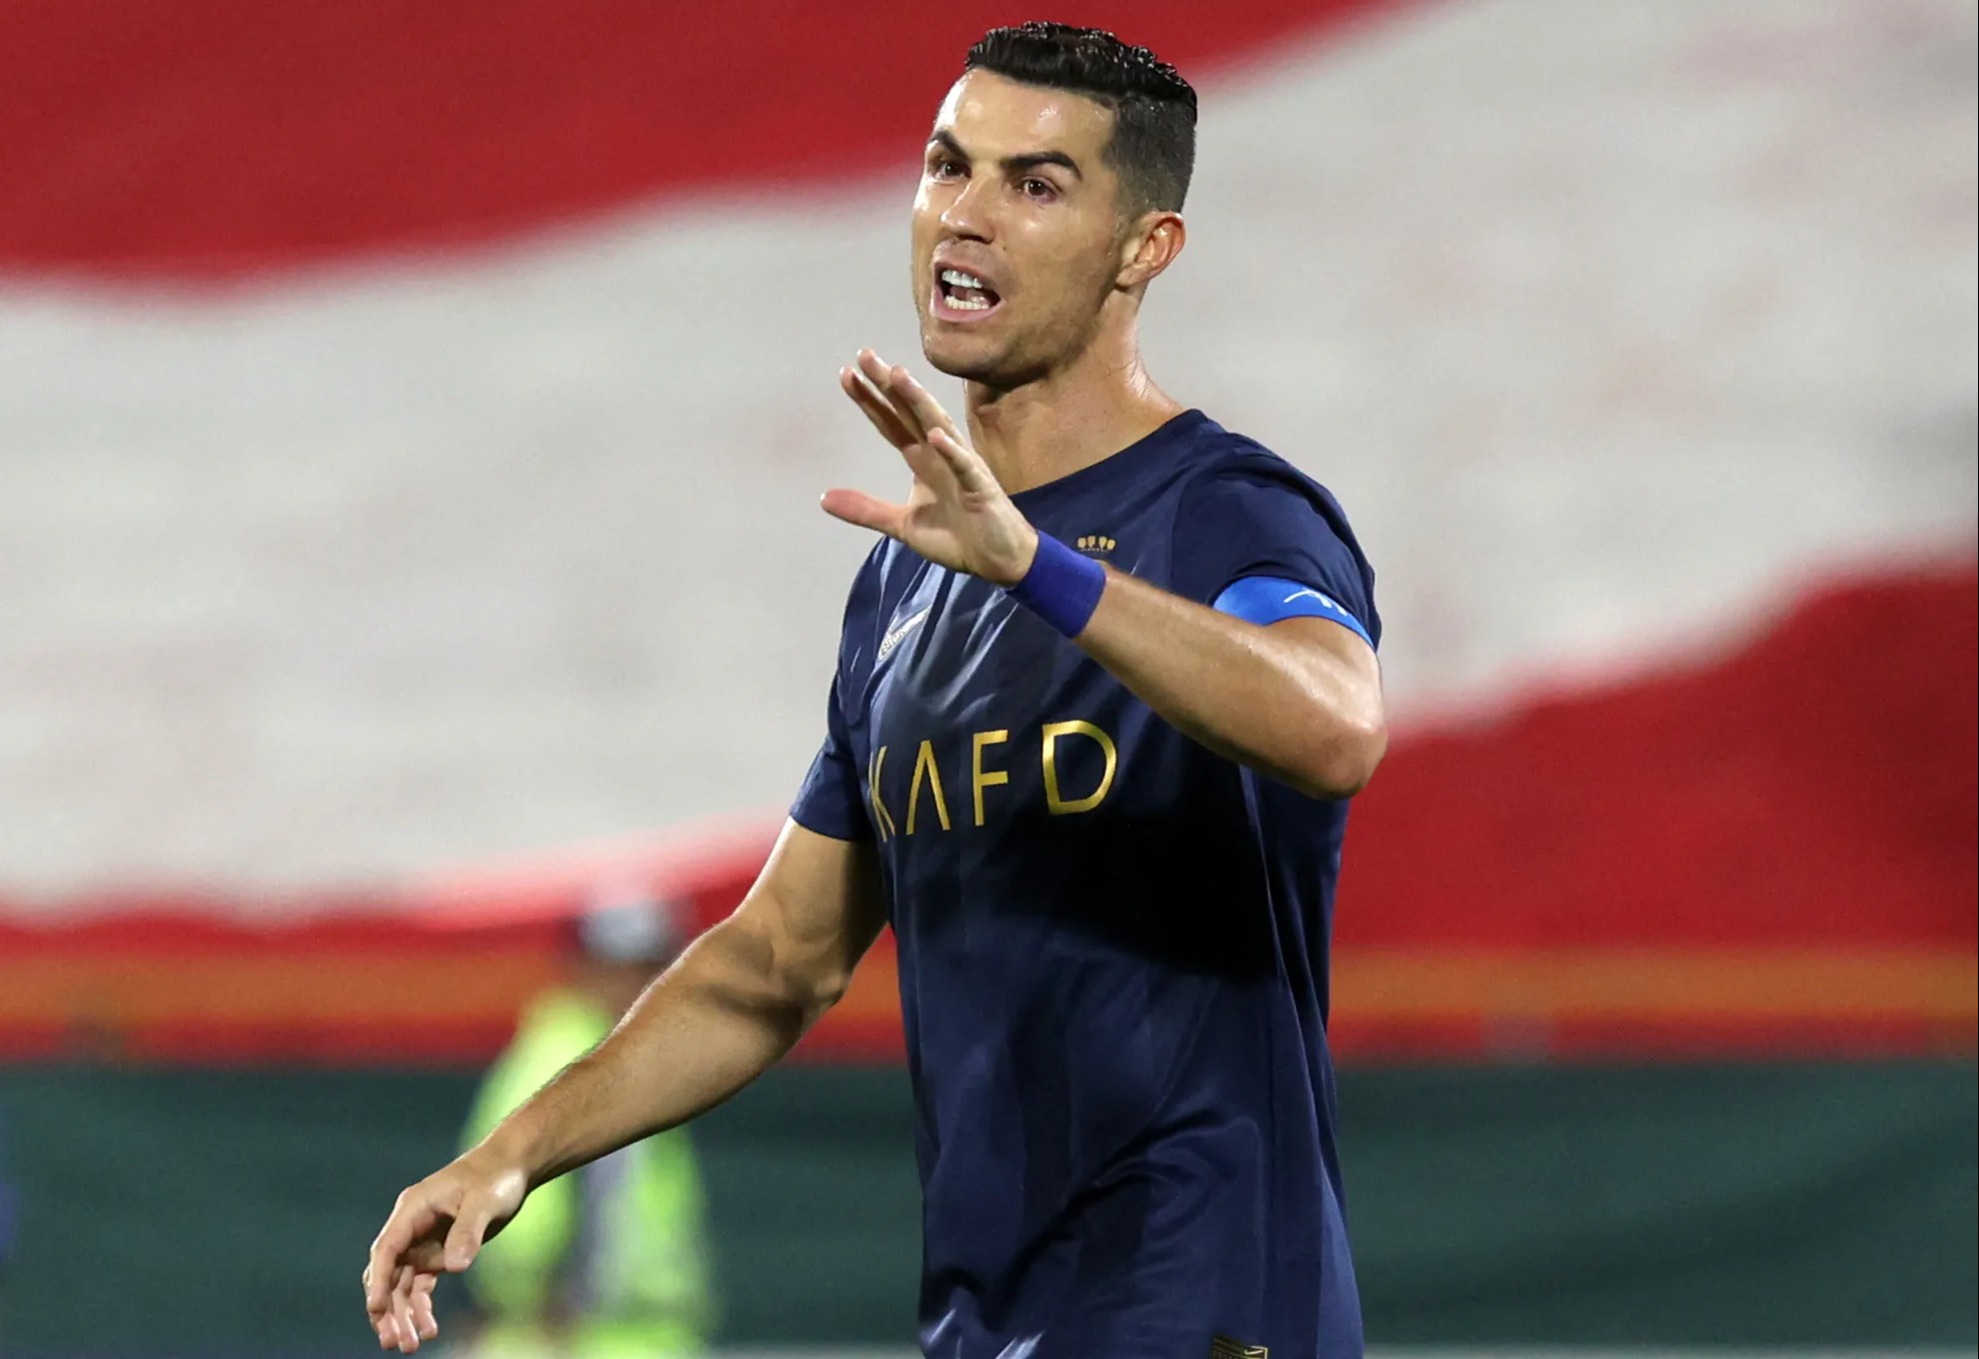 Explain the reason why Ronaldo has to play in front of a 'Creepy crowd' in AFC Champions League